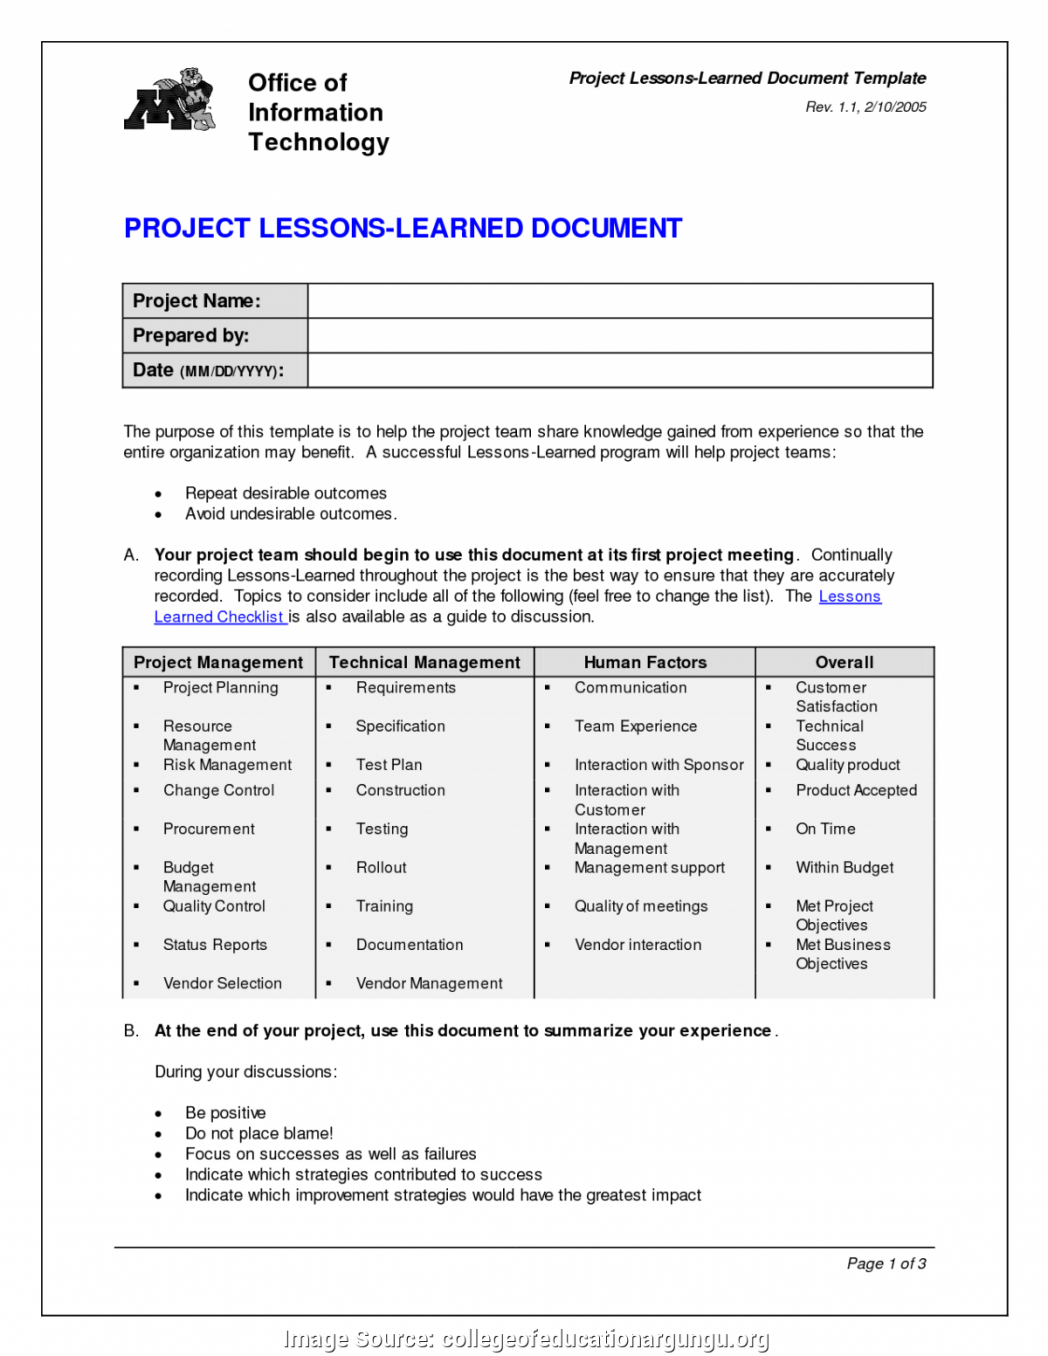 Project Management Final Report Template – Atlantaauctionco In Project Management Final Report Template